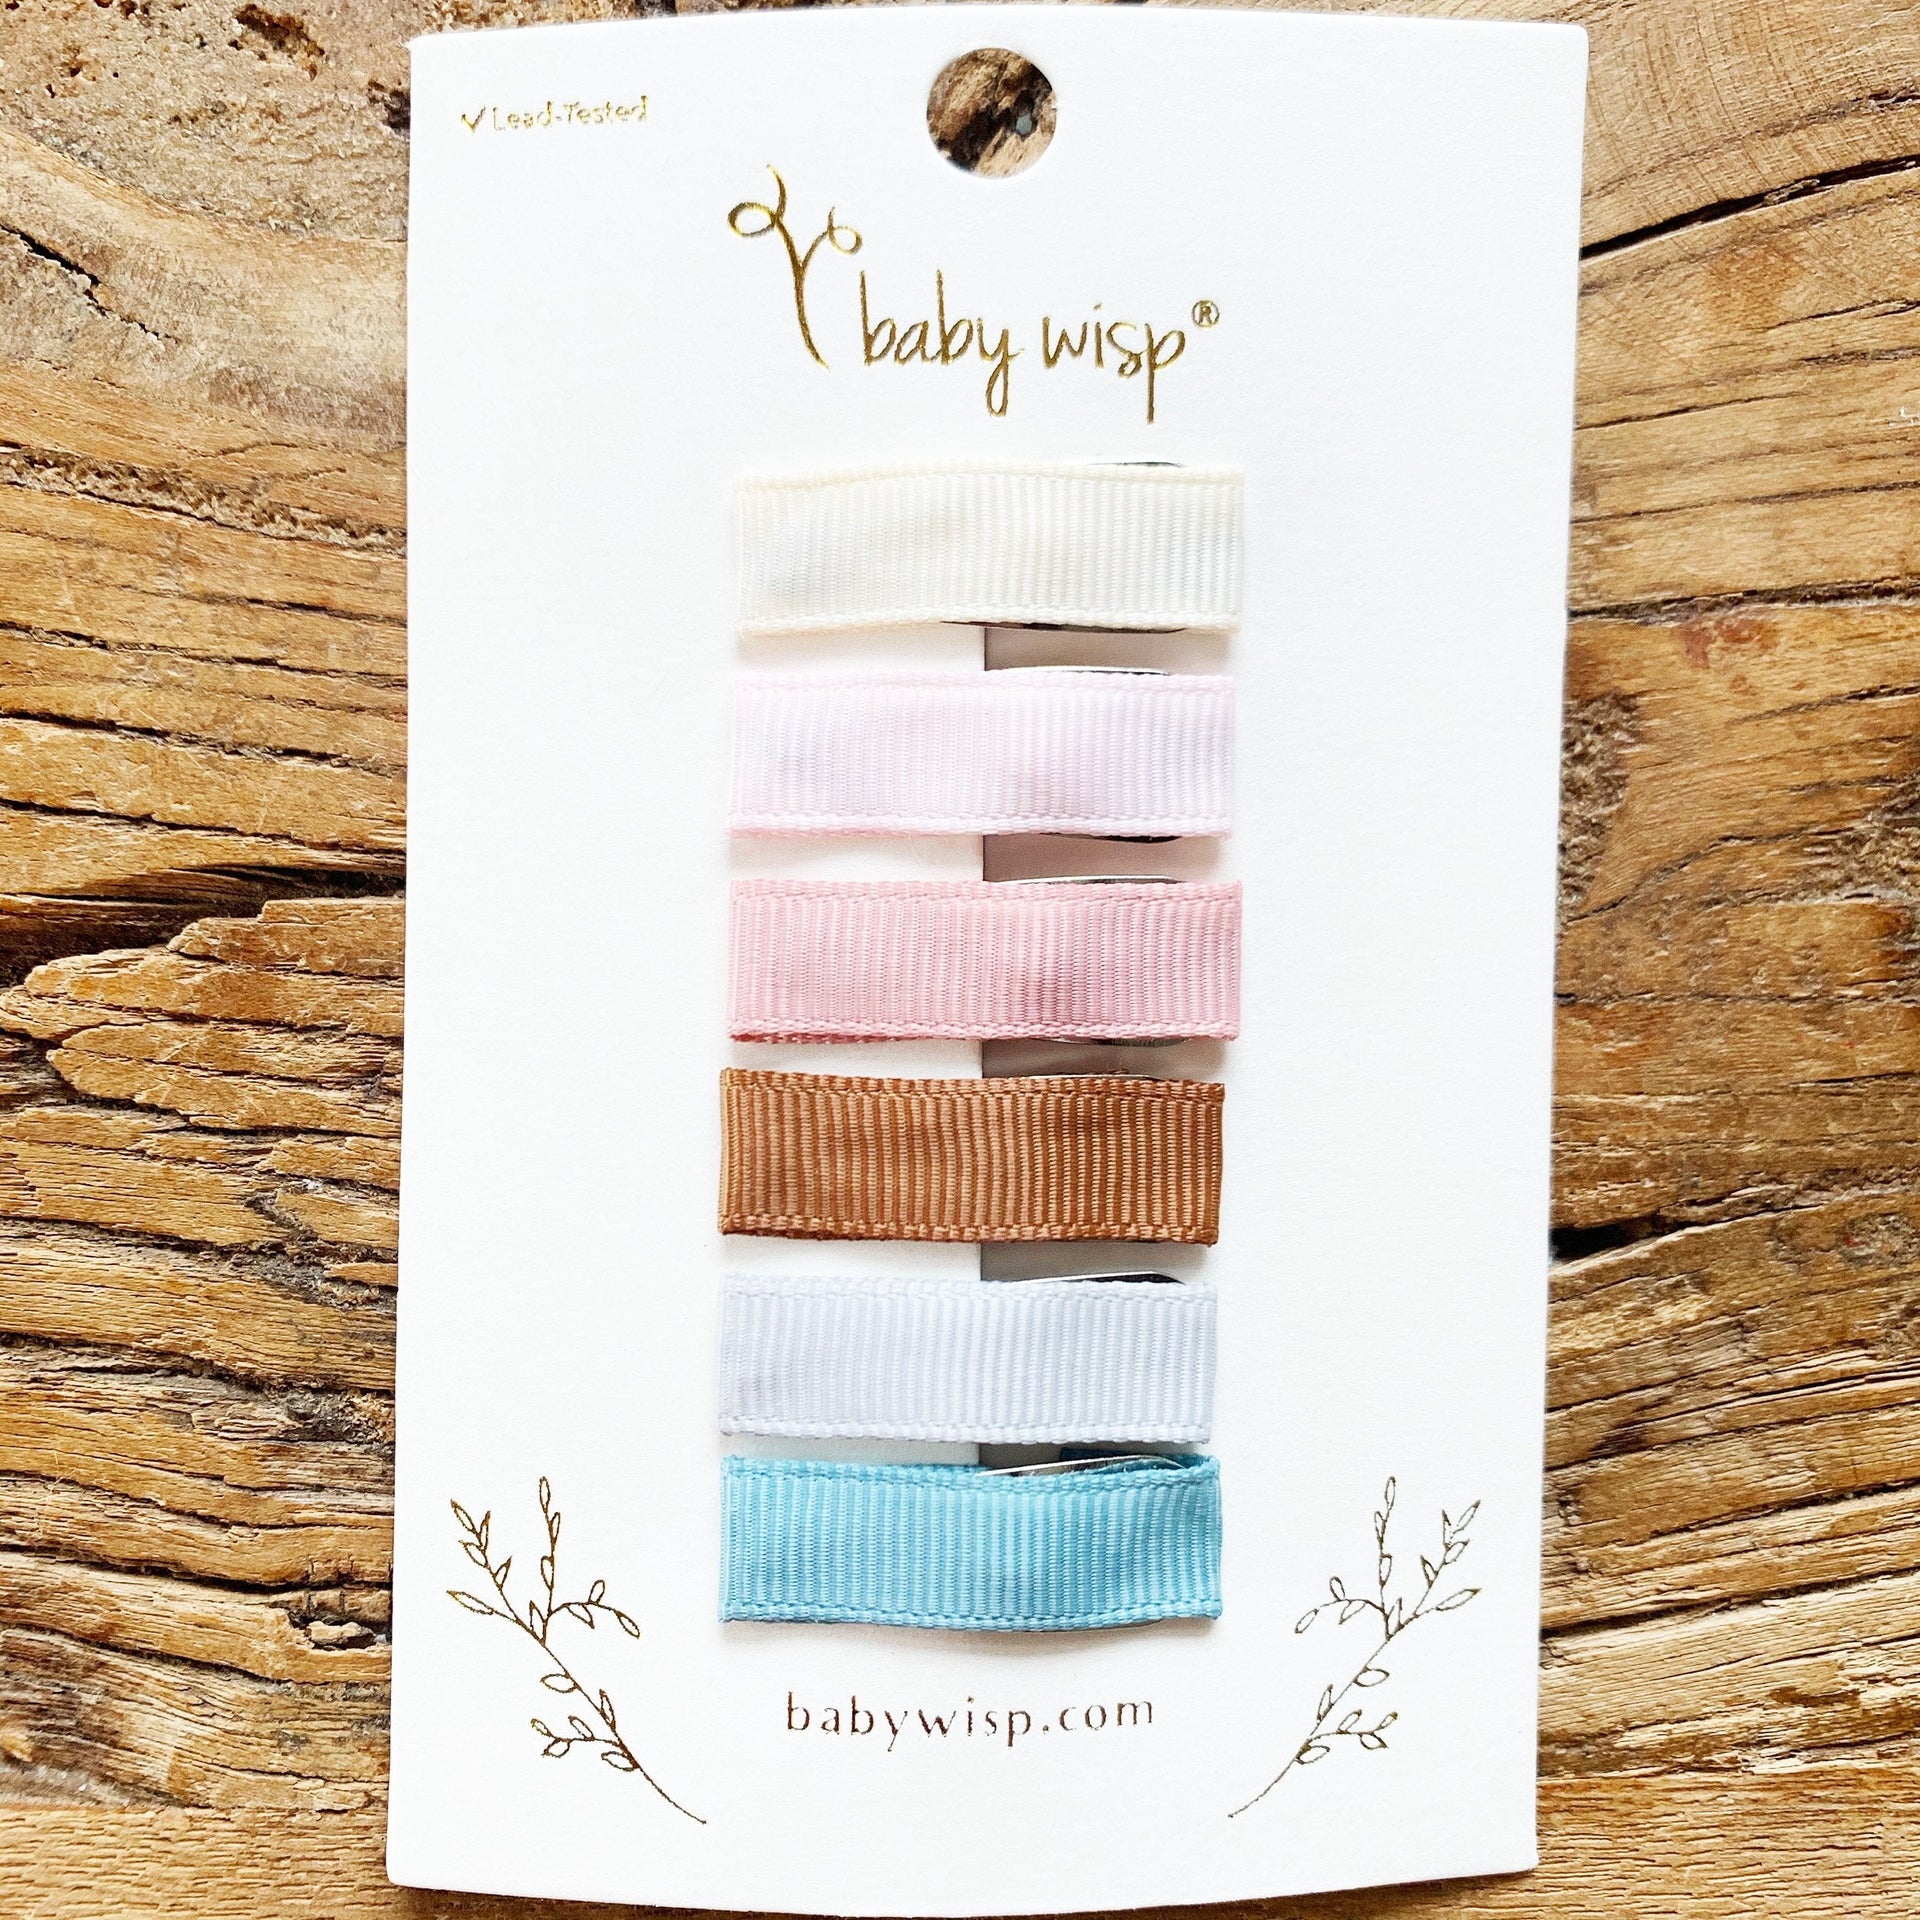 54 Small Snap Ribbon Lined Clips -  Bundle Deal for All Seasons - Simple Ribbon Snap Clips Baby Wisp